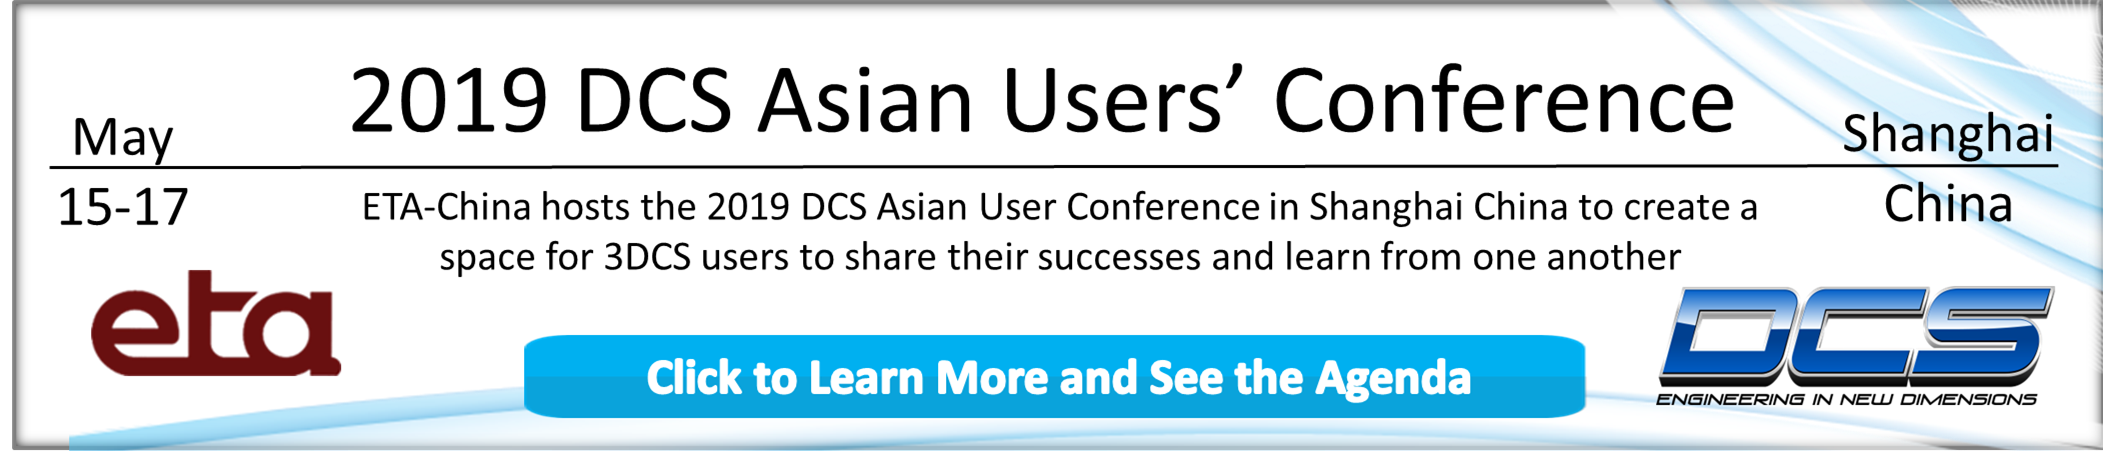 2019 Shanghai - DCS Asian Users' Conference